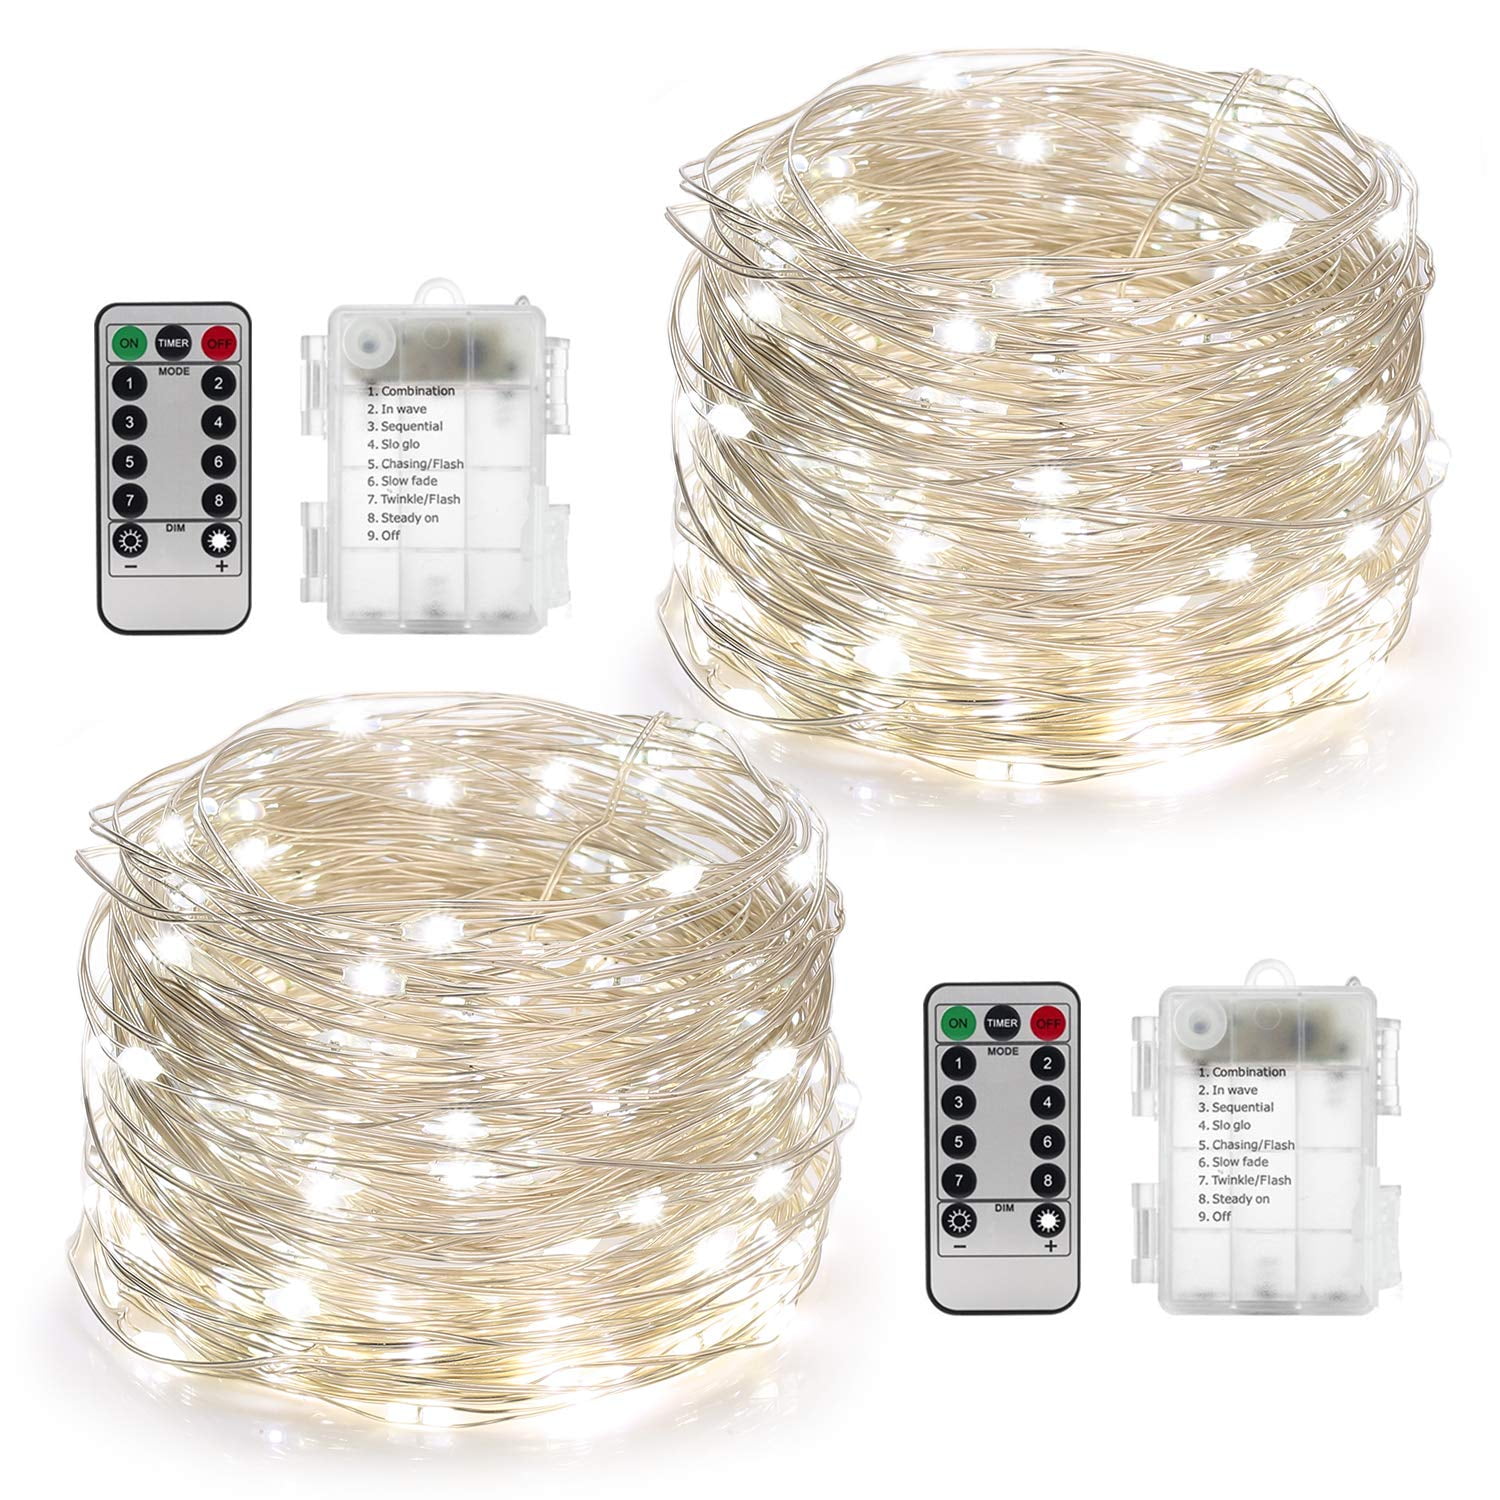 2 Pack LED Fairy Lights Battery Operated String Lights Waterproof 8 Modes 100 LED 33ft Fairy String Lights with Remote and Timer Firefly Lights Christmas Decor Bedroom Party Wedding Lights Multi Color 